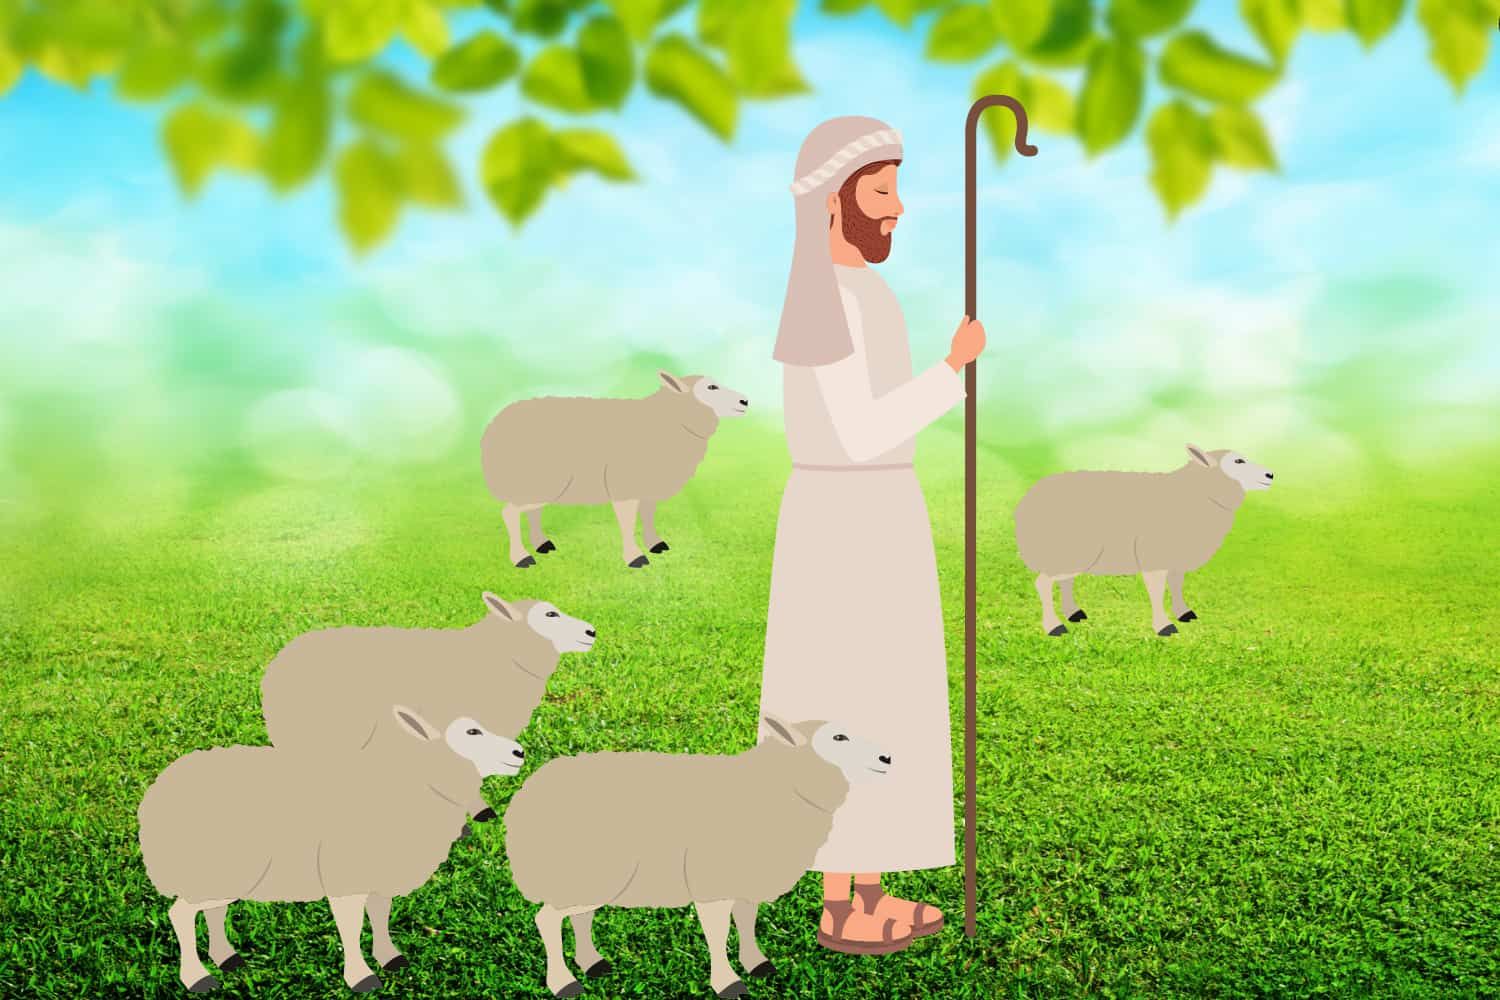 Icebreaker%20-%20NT%20Parable%20of%20the%20lost%20sheep%20-%20Sheep%20sheep%20shepherd-a3e5a649 Jesus - His teaching